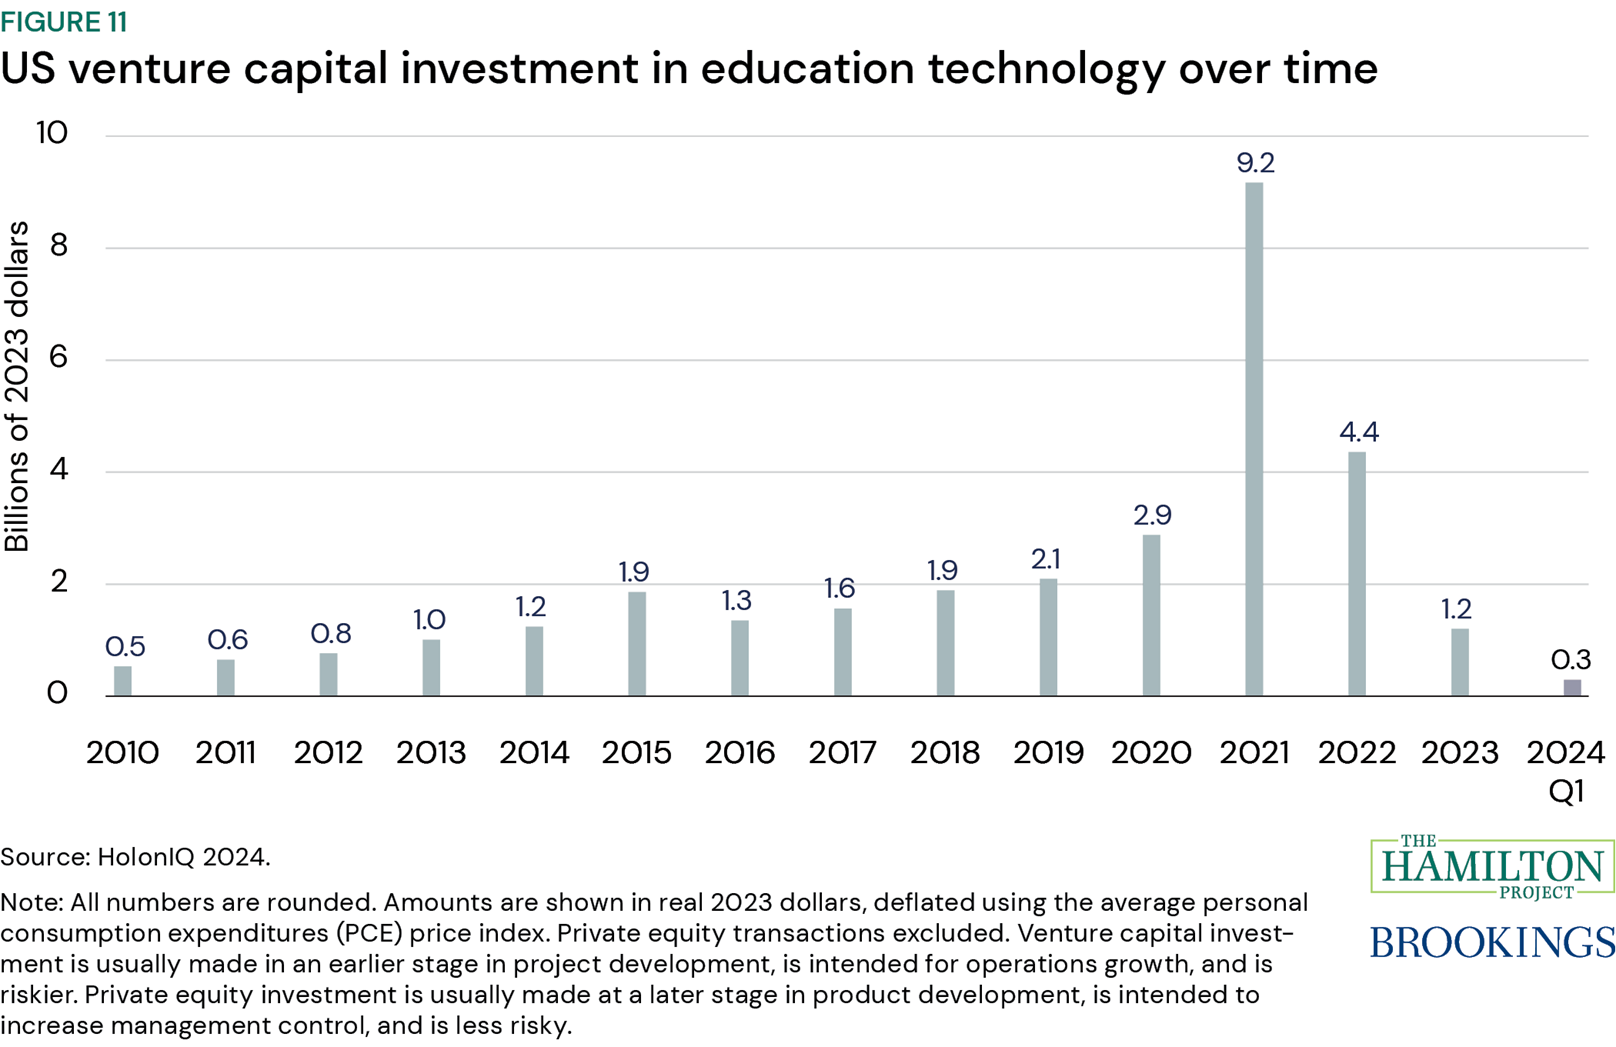 Figure 11: US venture capital investment in education technology over time